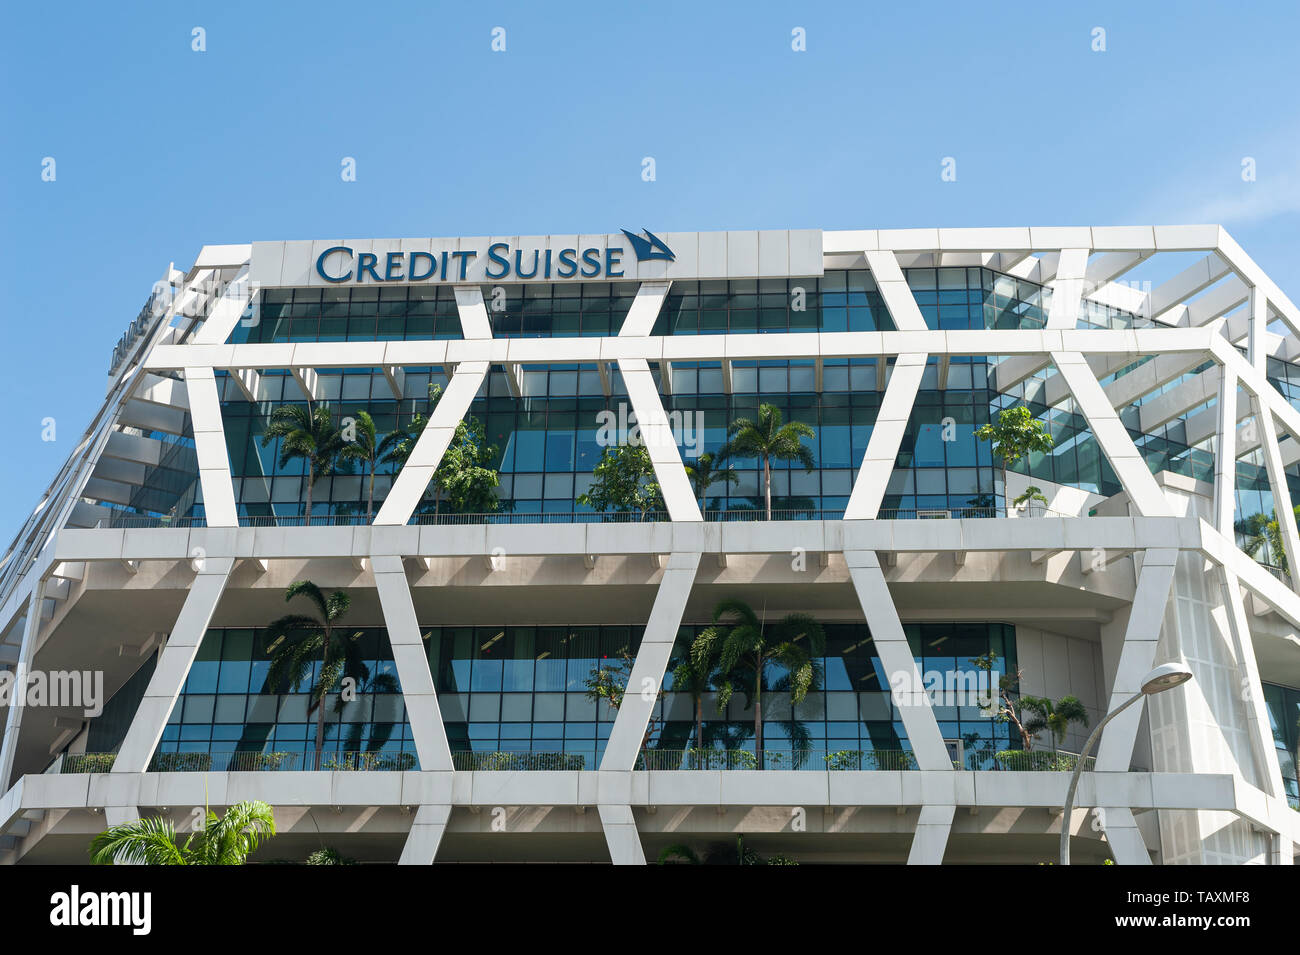 24.05.2019, Singapore, Republic of Singapore, Asia - Modern Credit Suisse bank building at Changi Business Park. Stock Photo